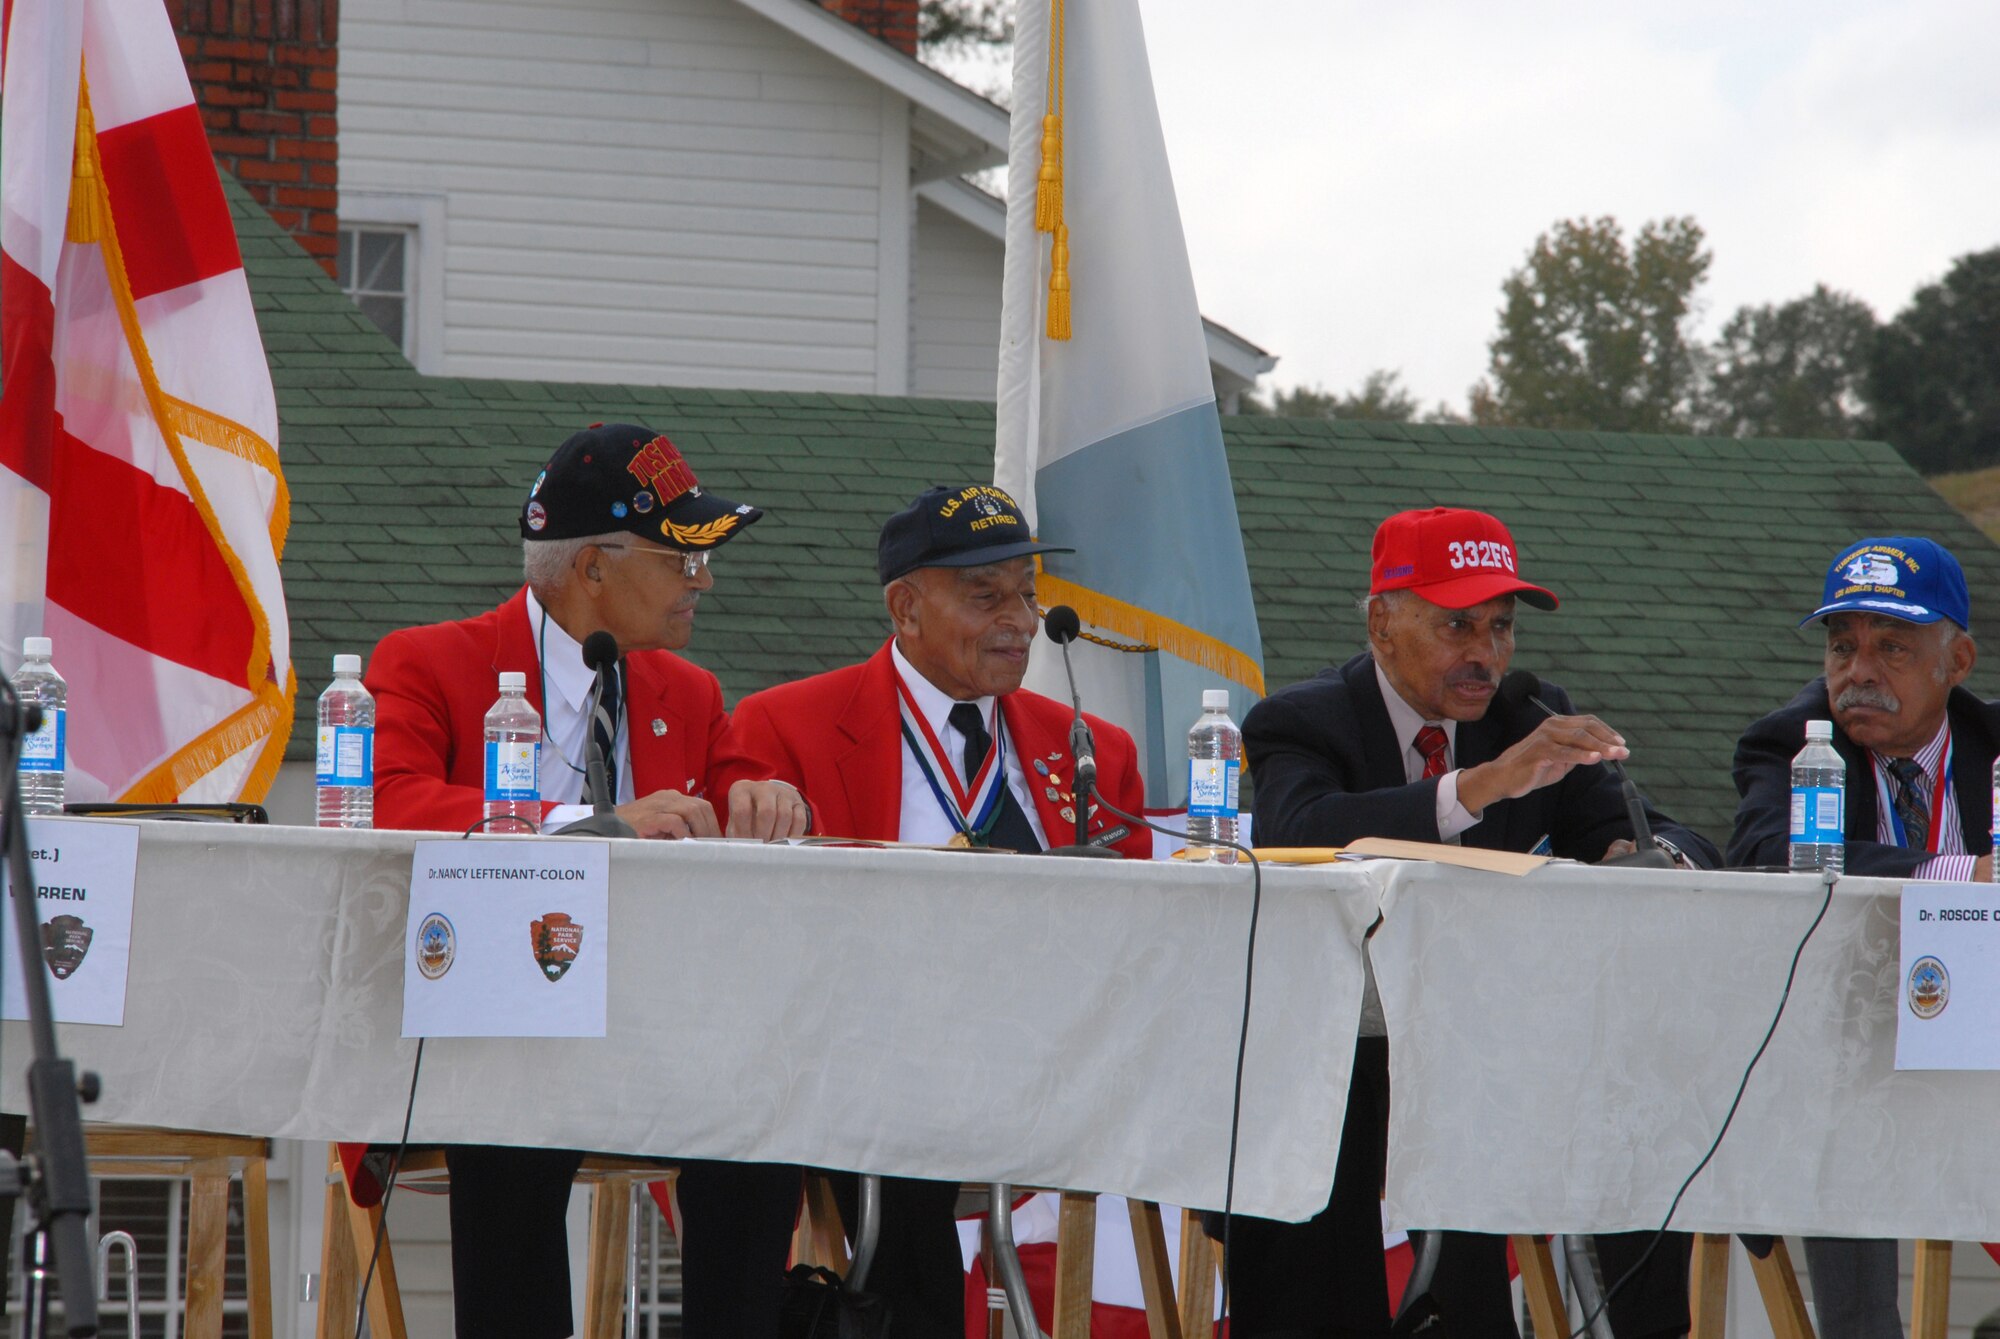 Tuskegee Airmen participate in a panel discussion prior to the opening ceremony of the Tuskegee Airmen National Historic Site Oct. 10 at Moton Field, Tuskegee, Ala. (U.S. Air Force Photo by Lt. Col. Jerry Lobb)         